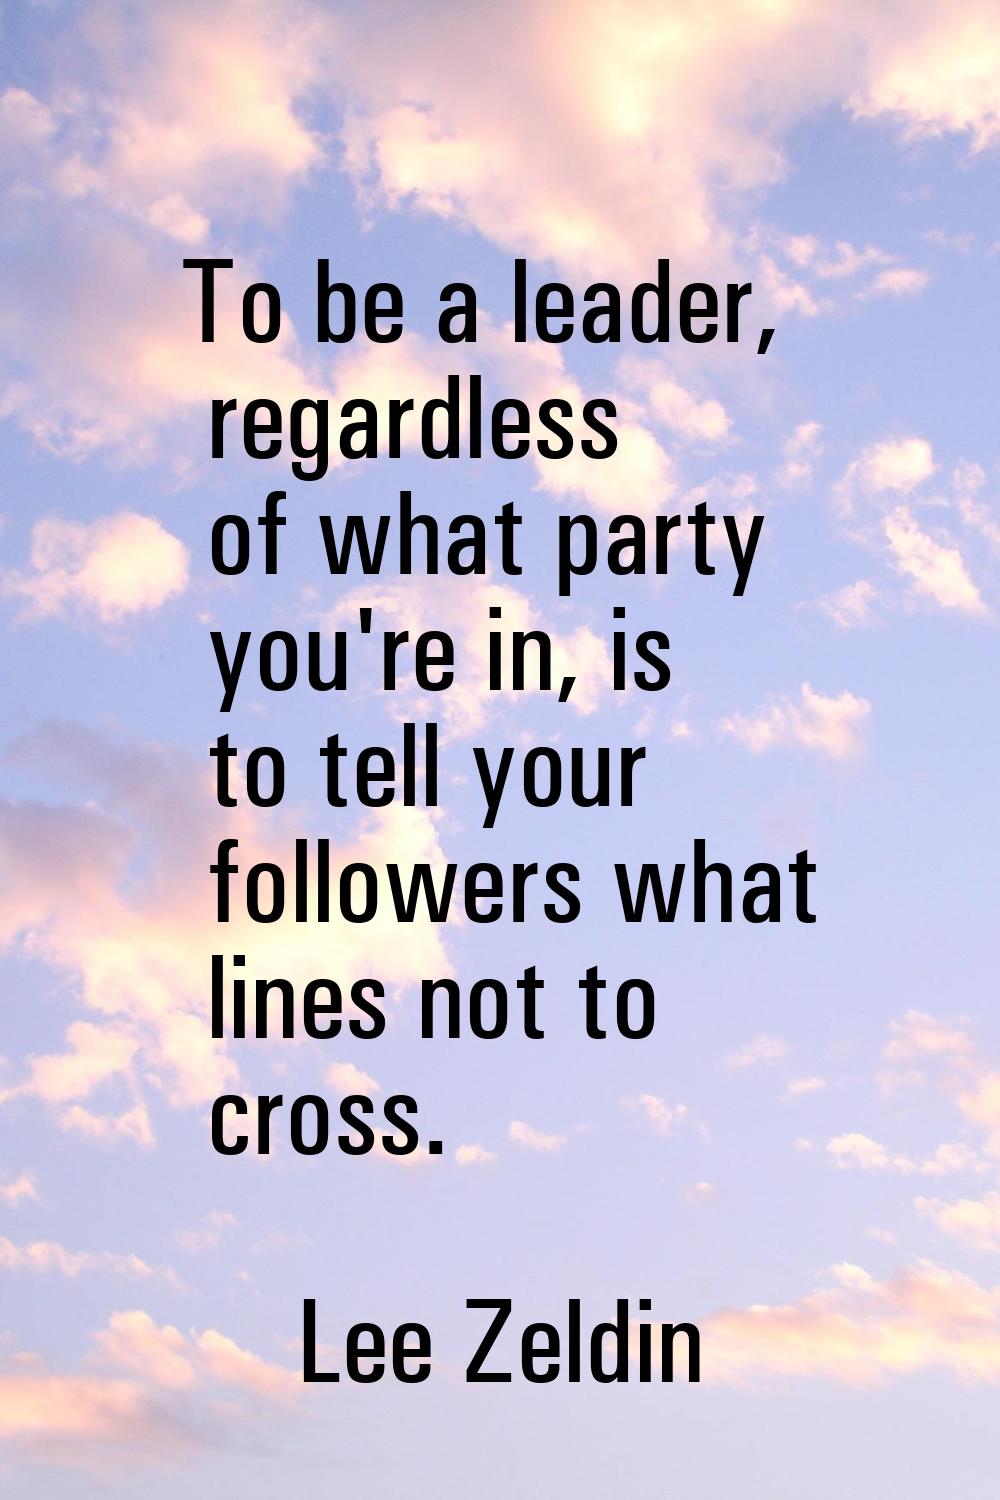 To be a leader, regardless of what party you're in, is to tell your followers what lines not to cro